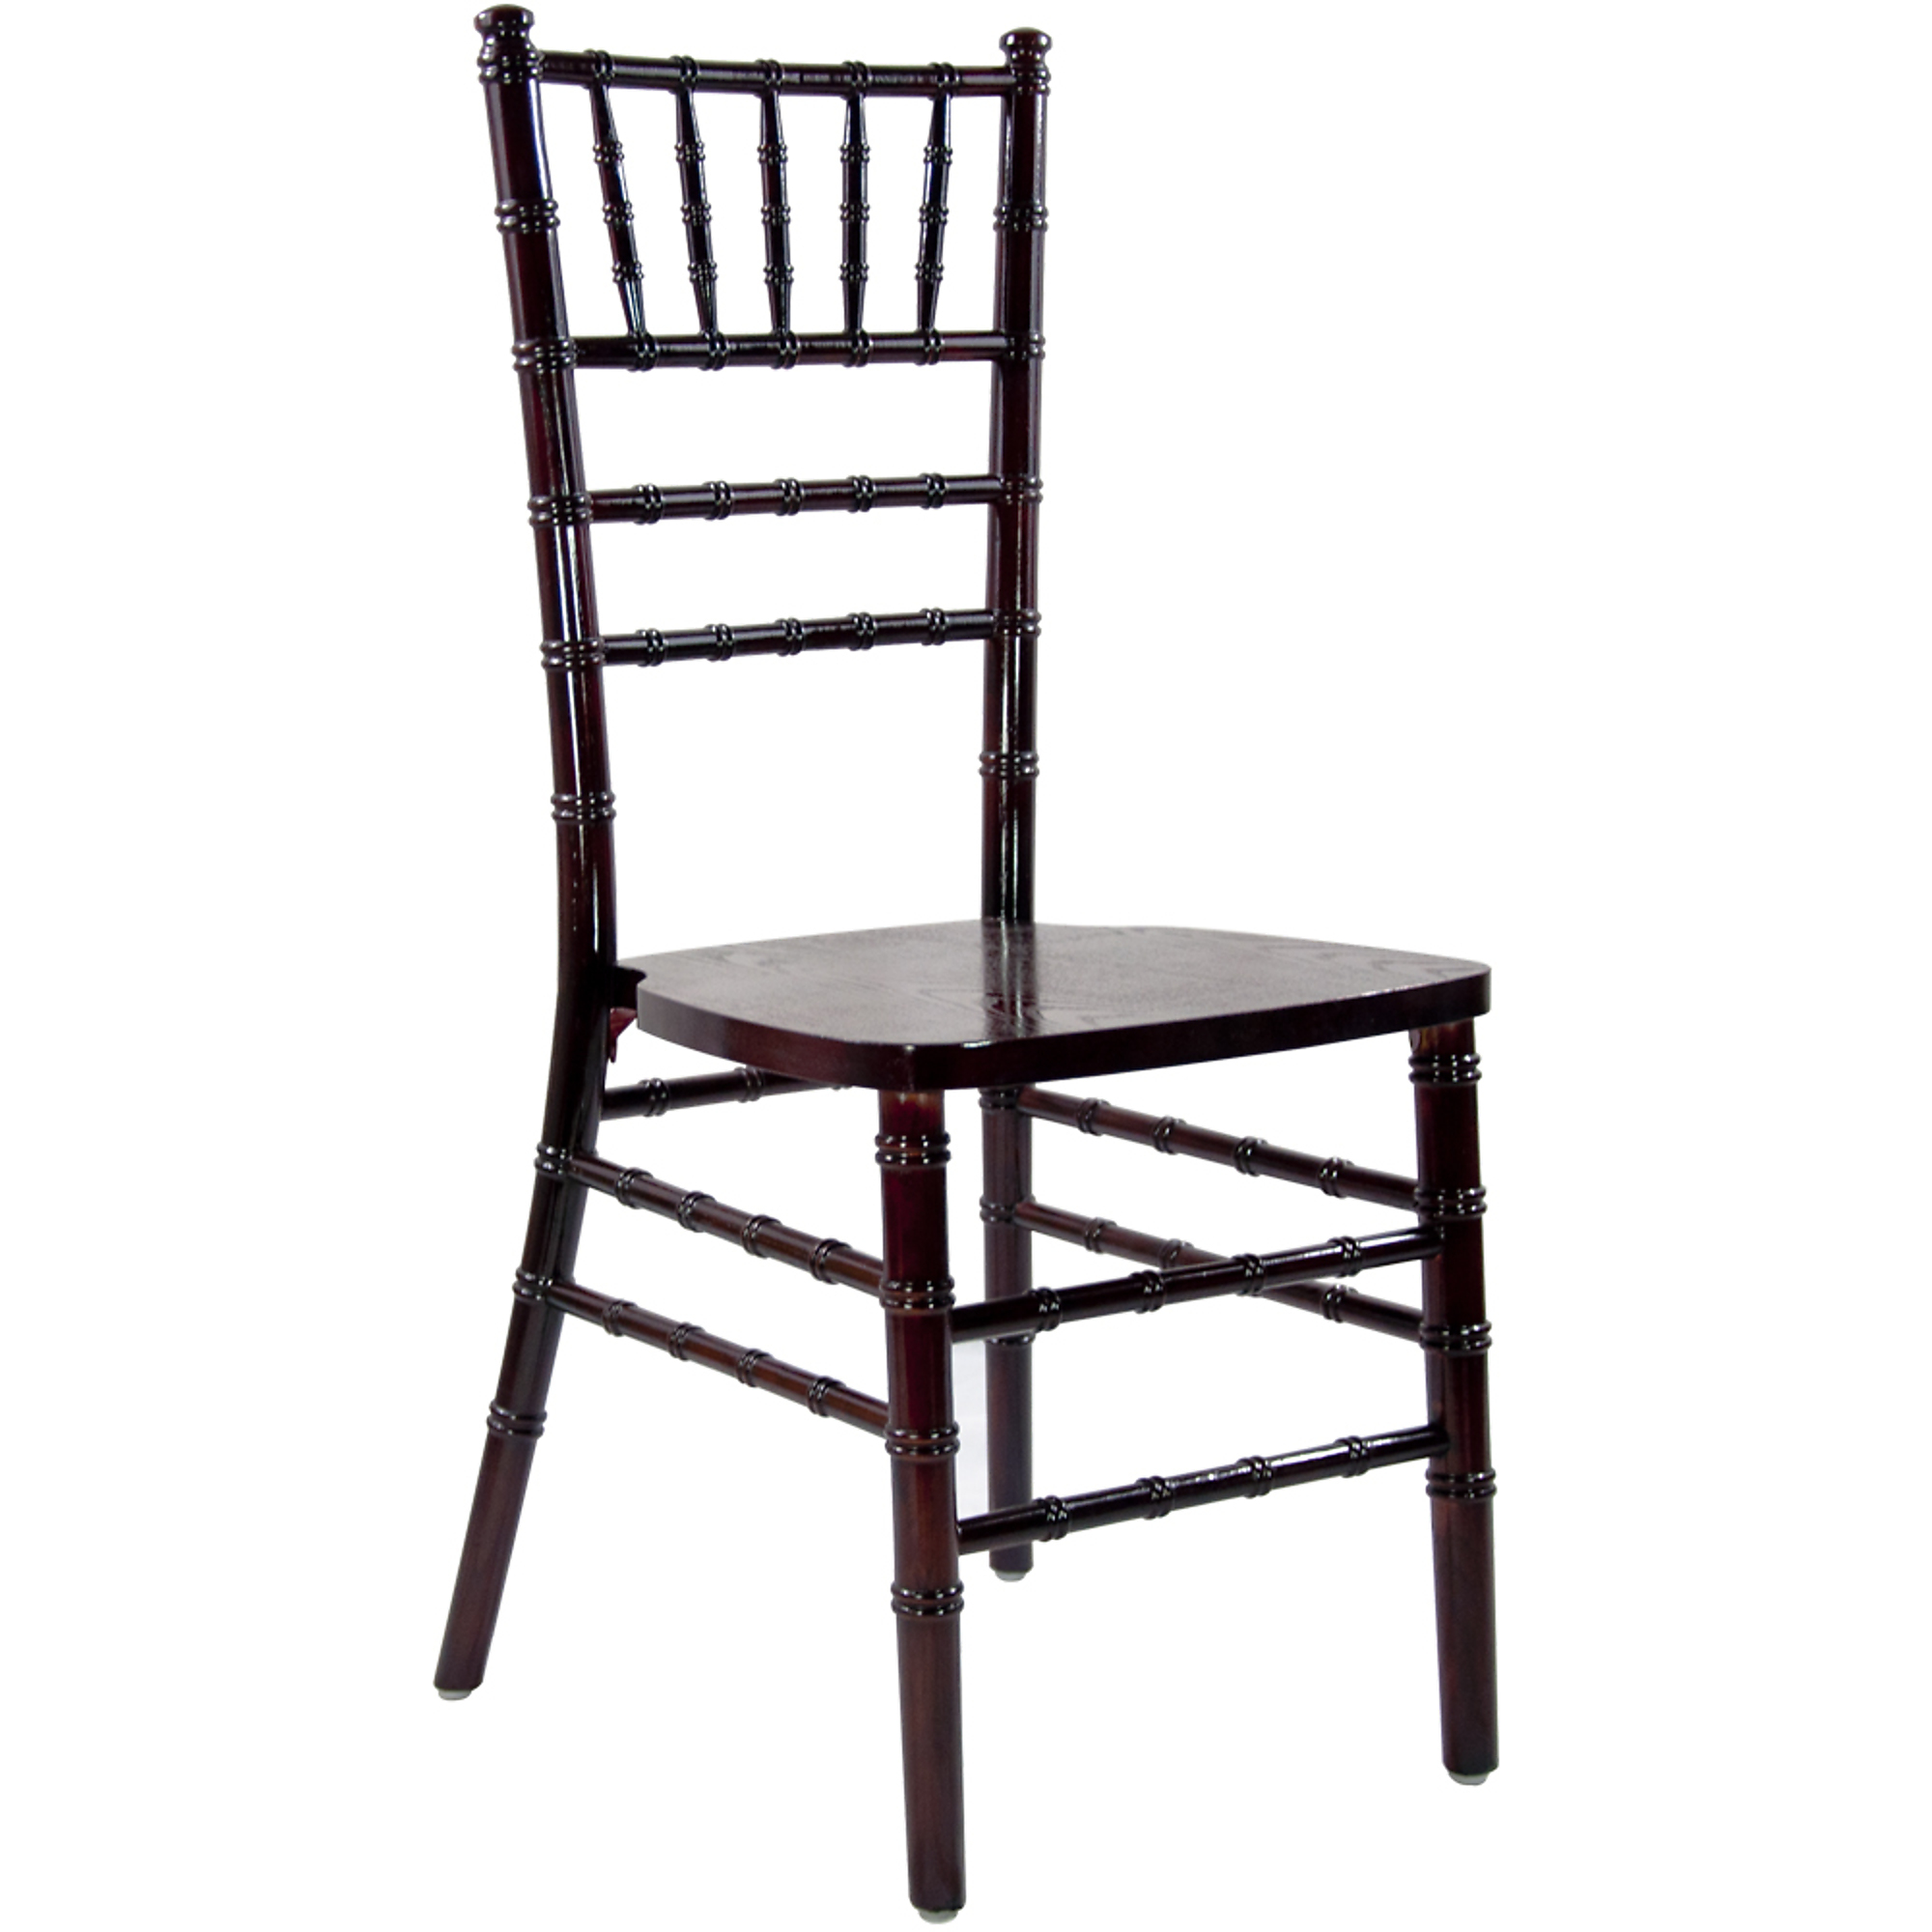 Flash Furniture, Mahogany Chiavari Chair, Primary Color Brown, Included (qty.) 1, Model WDCHIM